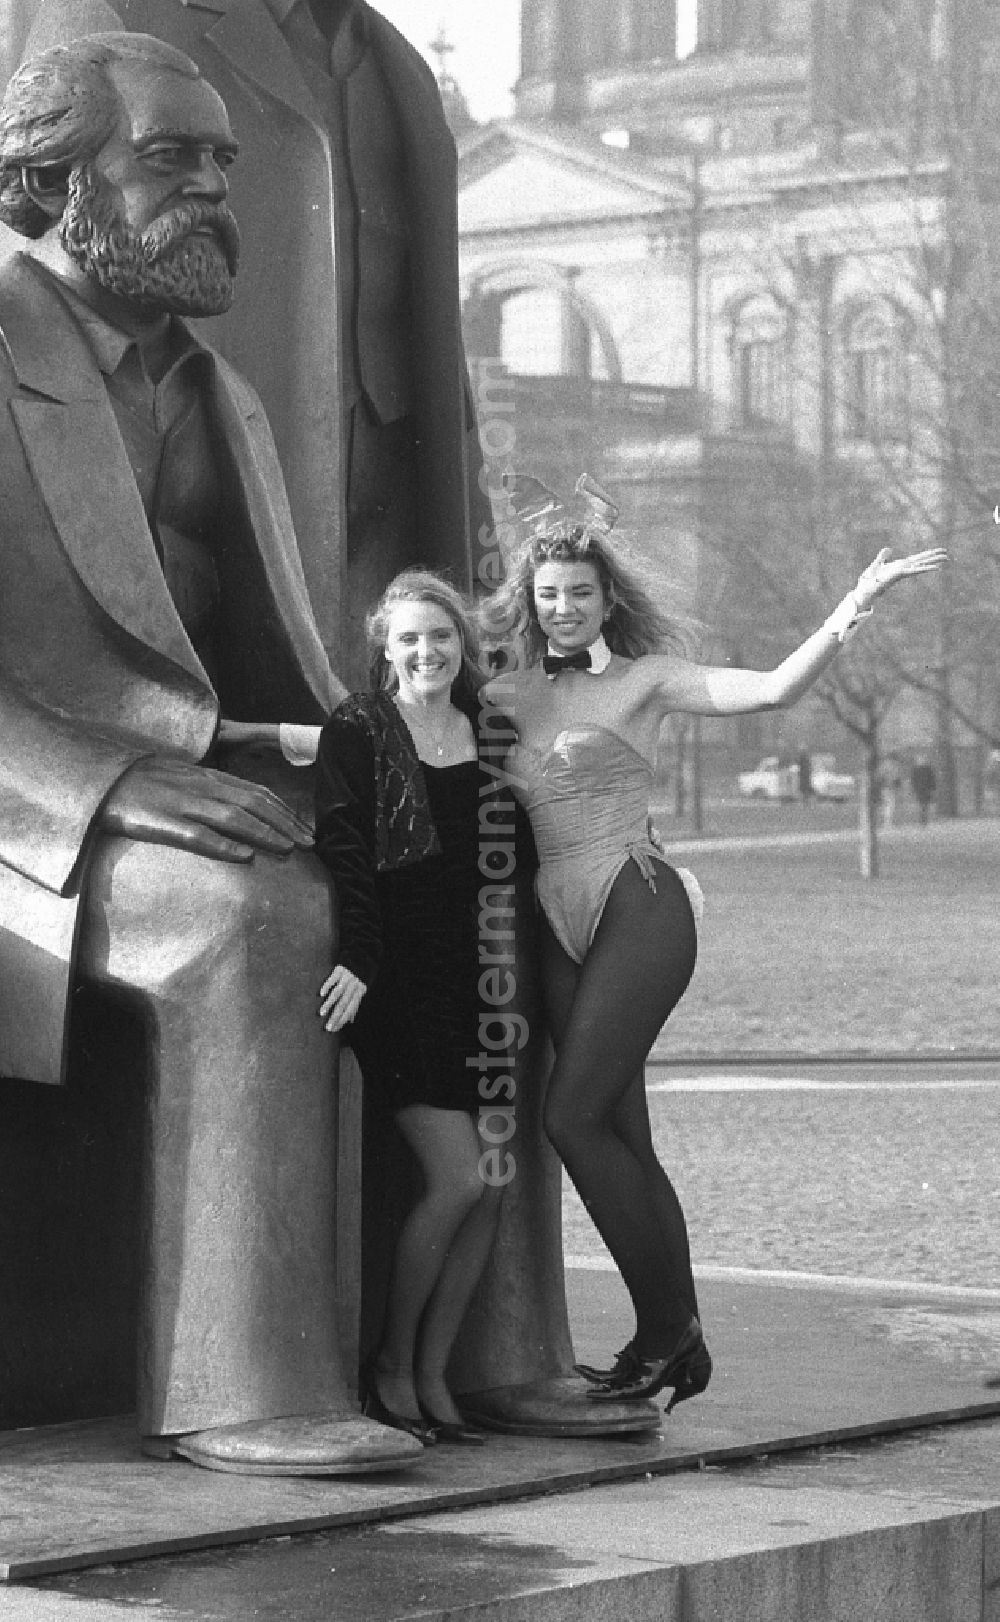 GDR photo archive: Berlin - As a young woman, Anja Kossak presents the latest women's fashion collection at a Playmate photo shoot in front of the statue of the Marx-Engels-Forum on Karl-Liebknecht-Strasse in the Mitte district of East Berlin in the area of the former GDR, German Democratic Republic